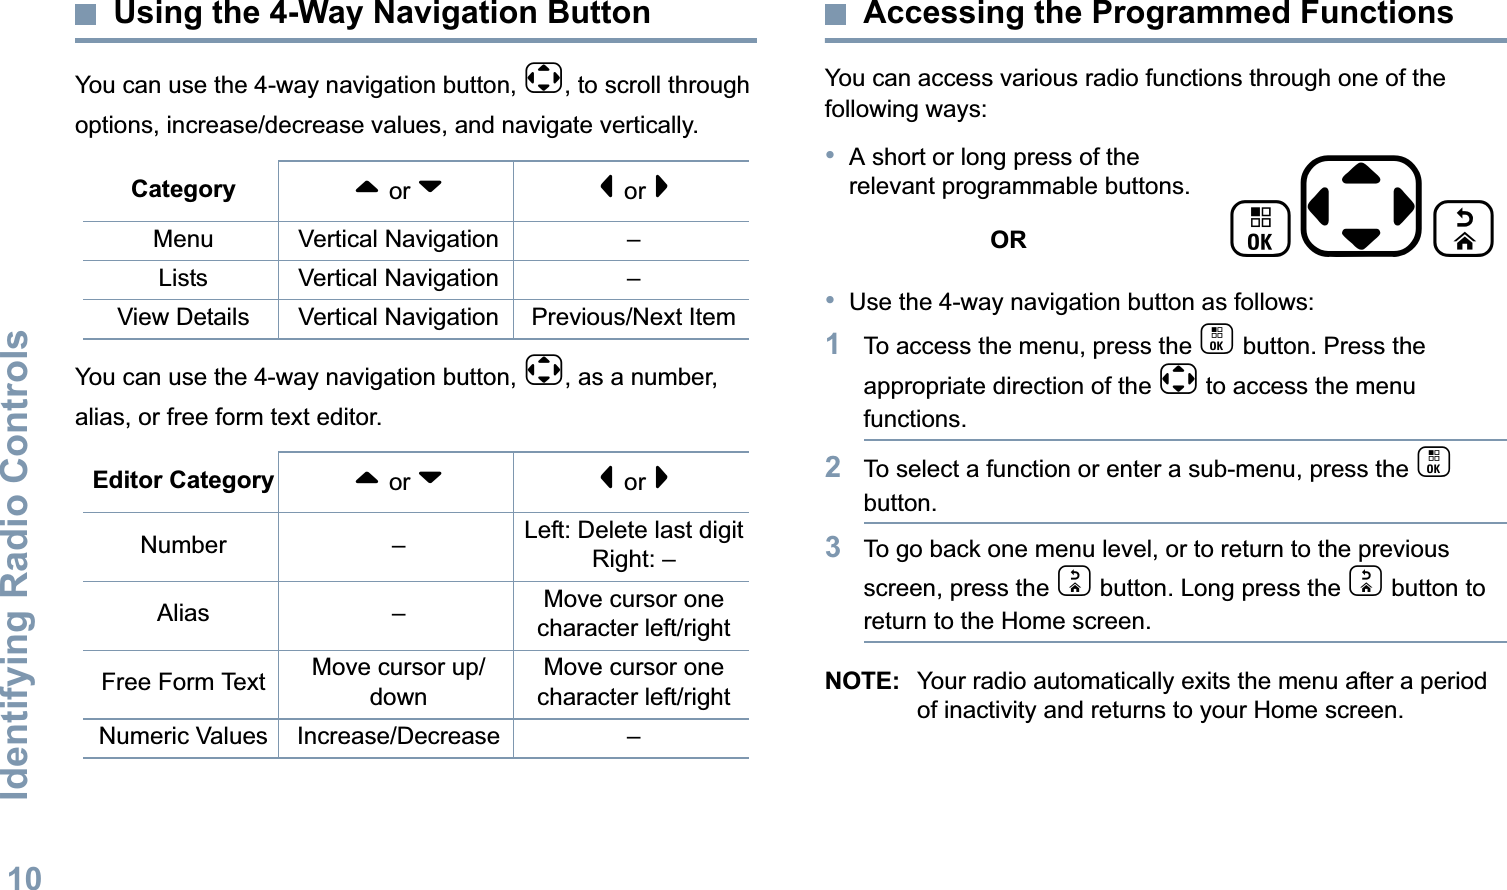 Identifying Radio ControlsEnglish10Using the 4-Way Navigation ButtonYou can use the 4-way navigation button, e, to scroll through options, increase/decrease values, and navigate vertically. You can use the 4-way navigation button, e, as a number, alias, or free form text editor. Accessing the Programmed FunctionsYou can access various radio functions through one of the following ways:•A short or long press of the relevant programmable buttons.OR•Use the 4-way navigation button as follows:1To access the menu, press the c button. Press the appropriate direction of the e to access the menu functions. 2To select a function or enter a sub-menu, press the c button.3To go back one menu level, or to return to the previous screen, press the d button. Long press the d button to return to the Home screen.NOTE: Your radio automatically exits the menu after a period of inactivity and returns to your Home screen.Category ^ or v&lt; or &gt;Menu Vertical Navigation –Lists Vertical Navigation –View Details Vertical Navigation Previous/Next ItemEditor Category ^ or v&lt; or &gt;Number – Left: Delete last digitRight: –Alias – Move cursor one character left/rightFree Form Text Move cursor up/downMove cursor one character left/rightNumeric Values Increase/Decrease – ced